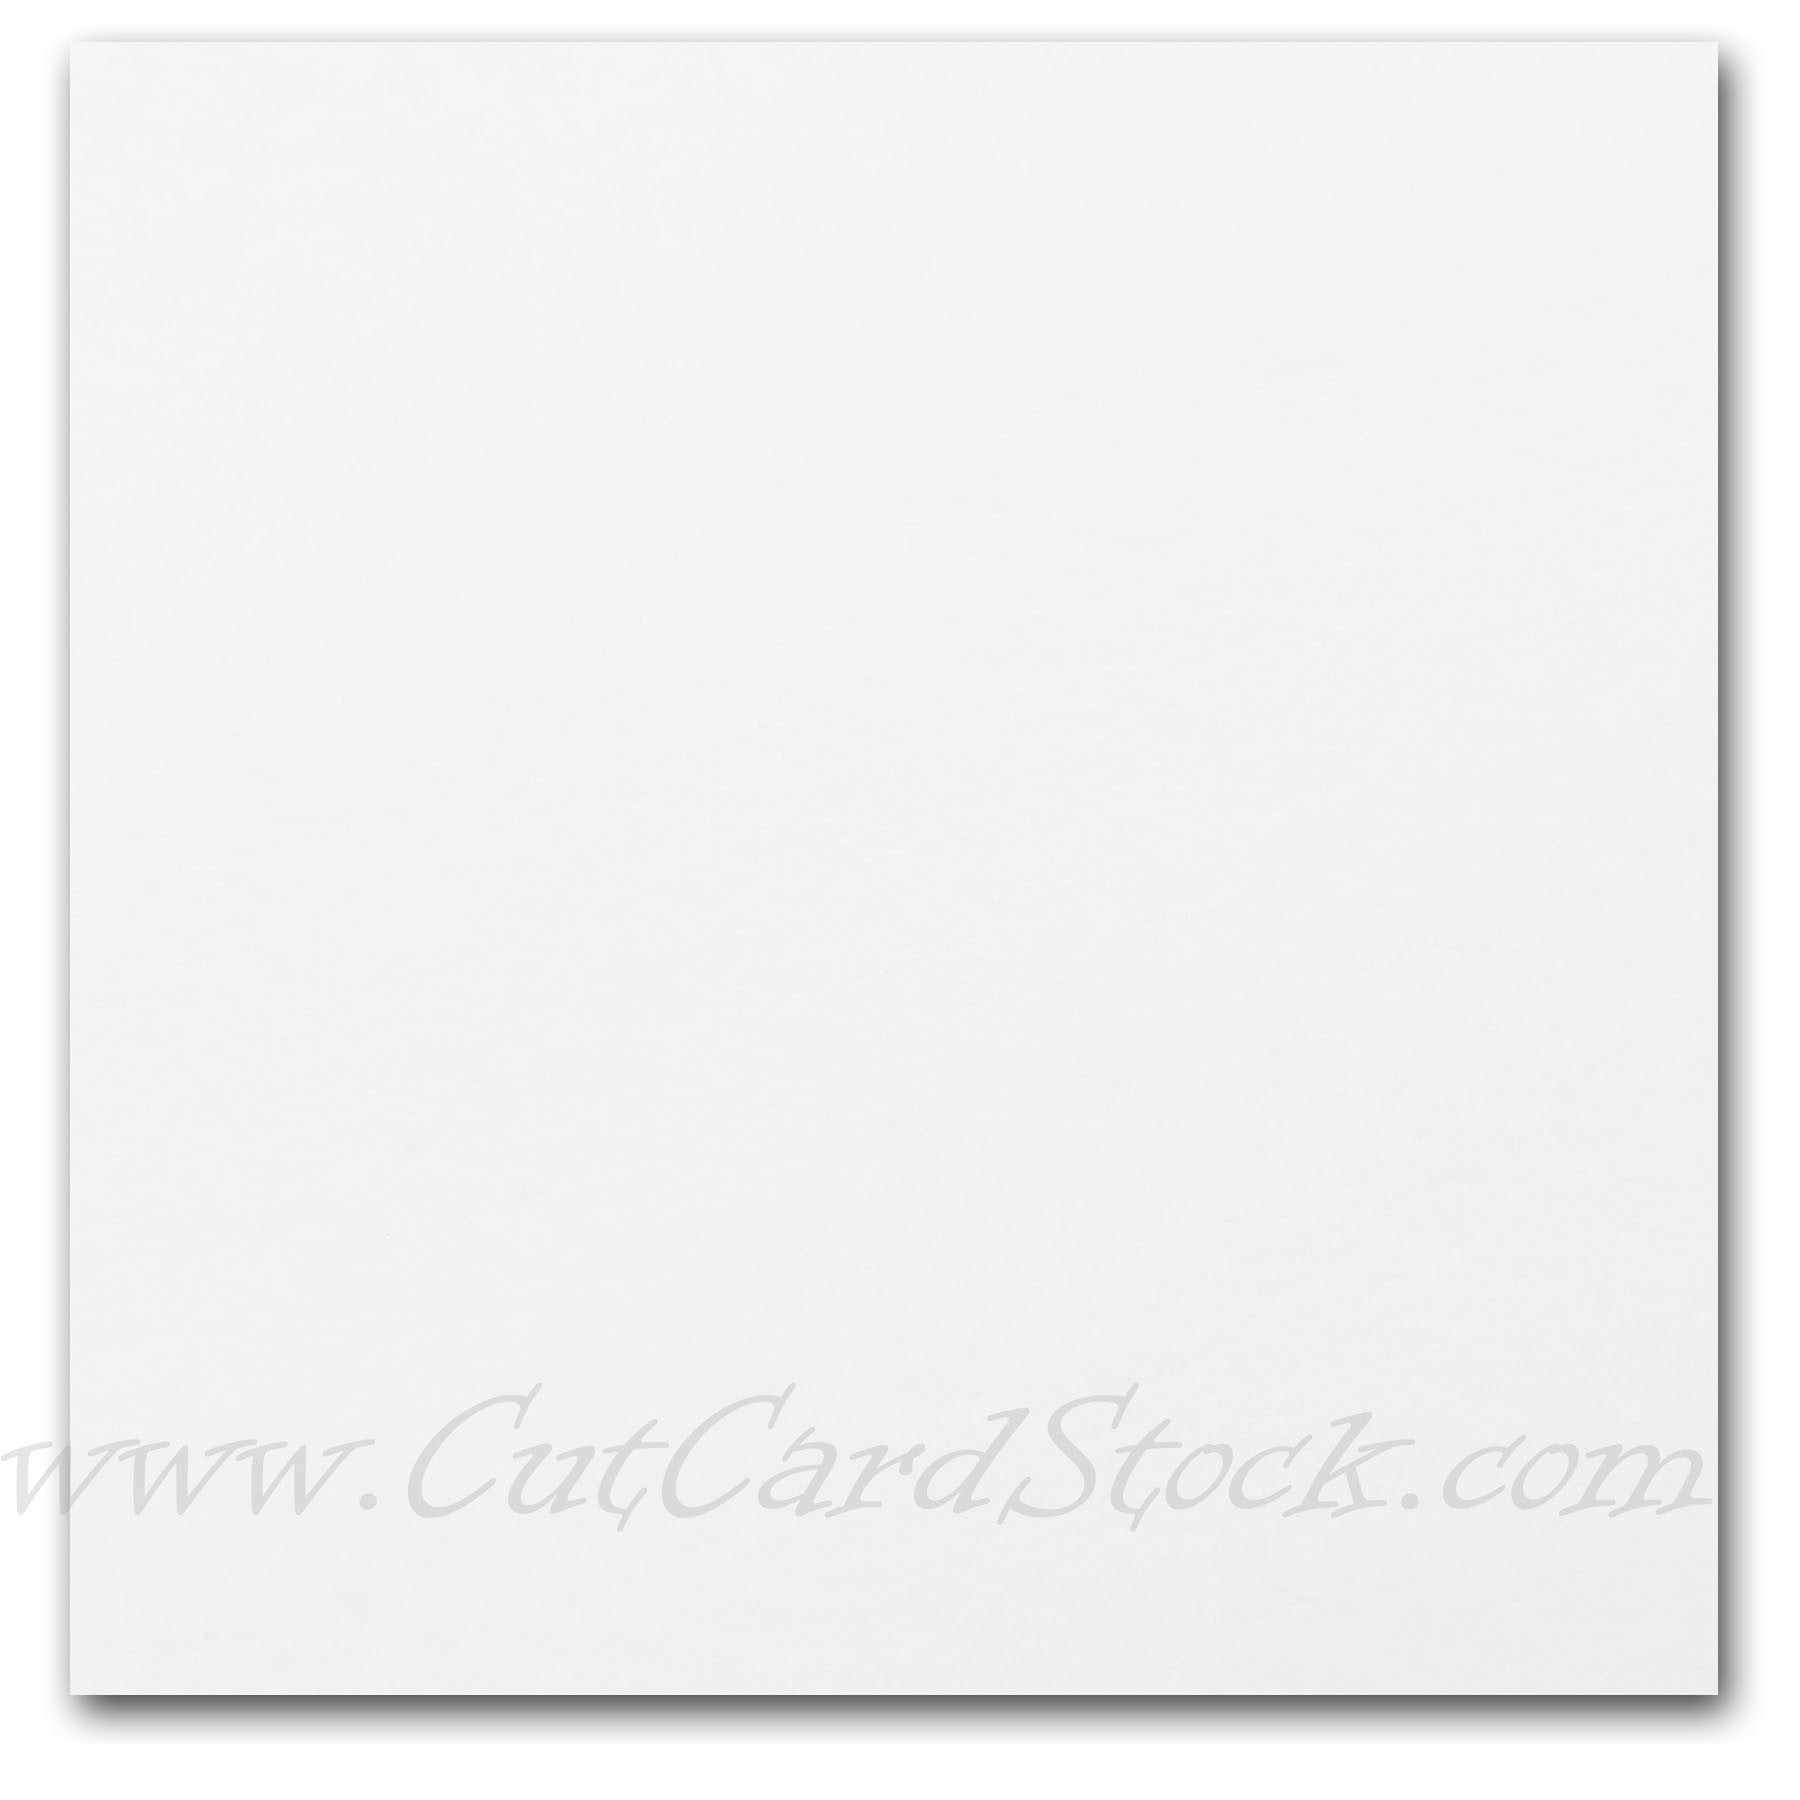 Springhill Index Card Stock for brochures, flyers and post cards -  CutCardStock